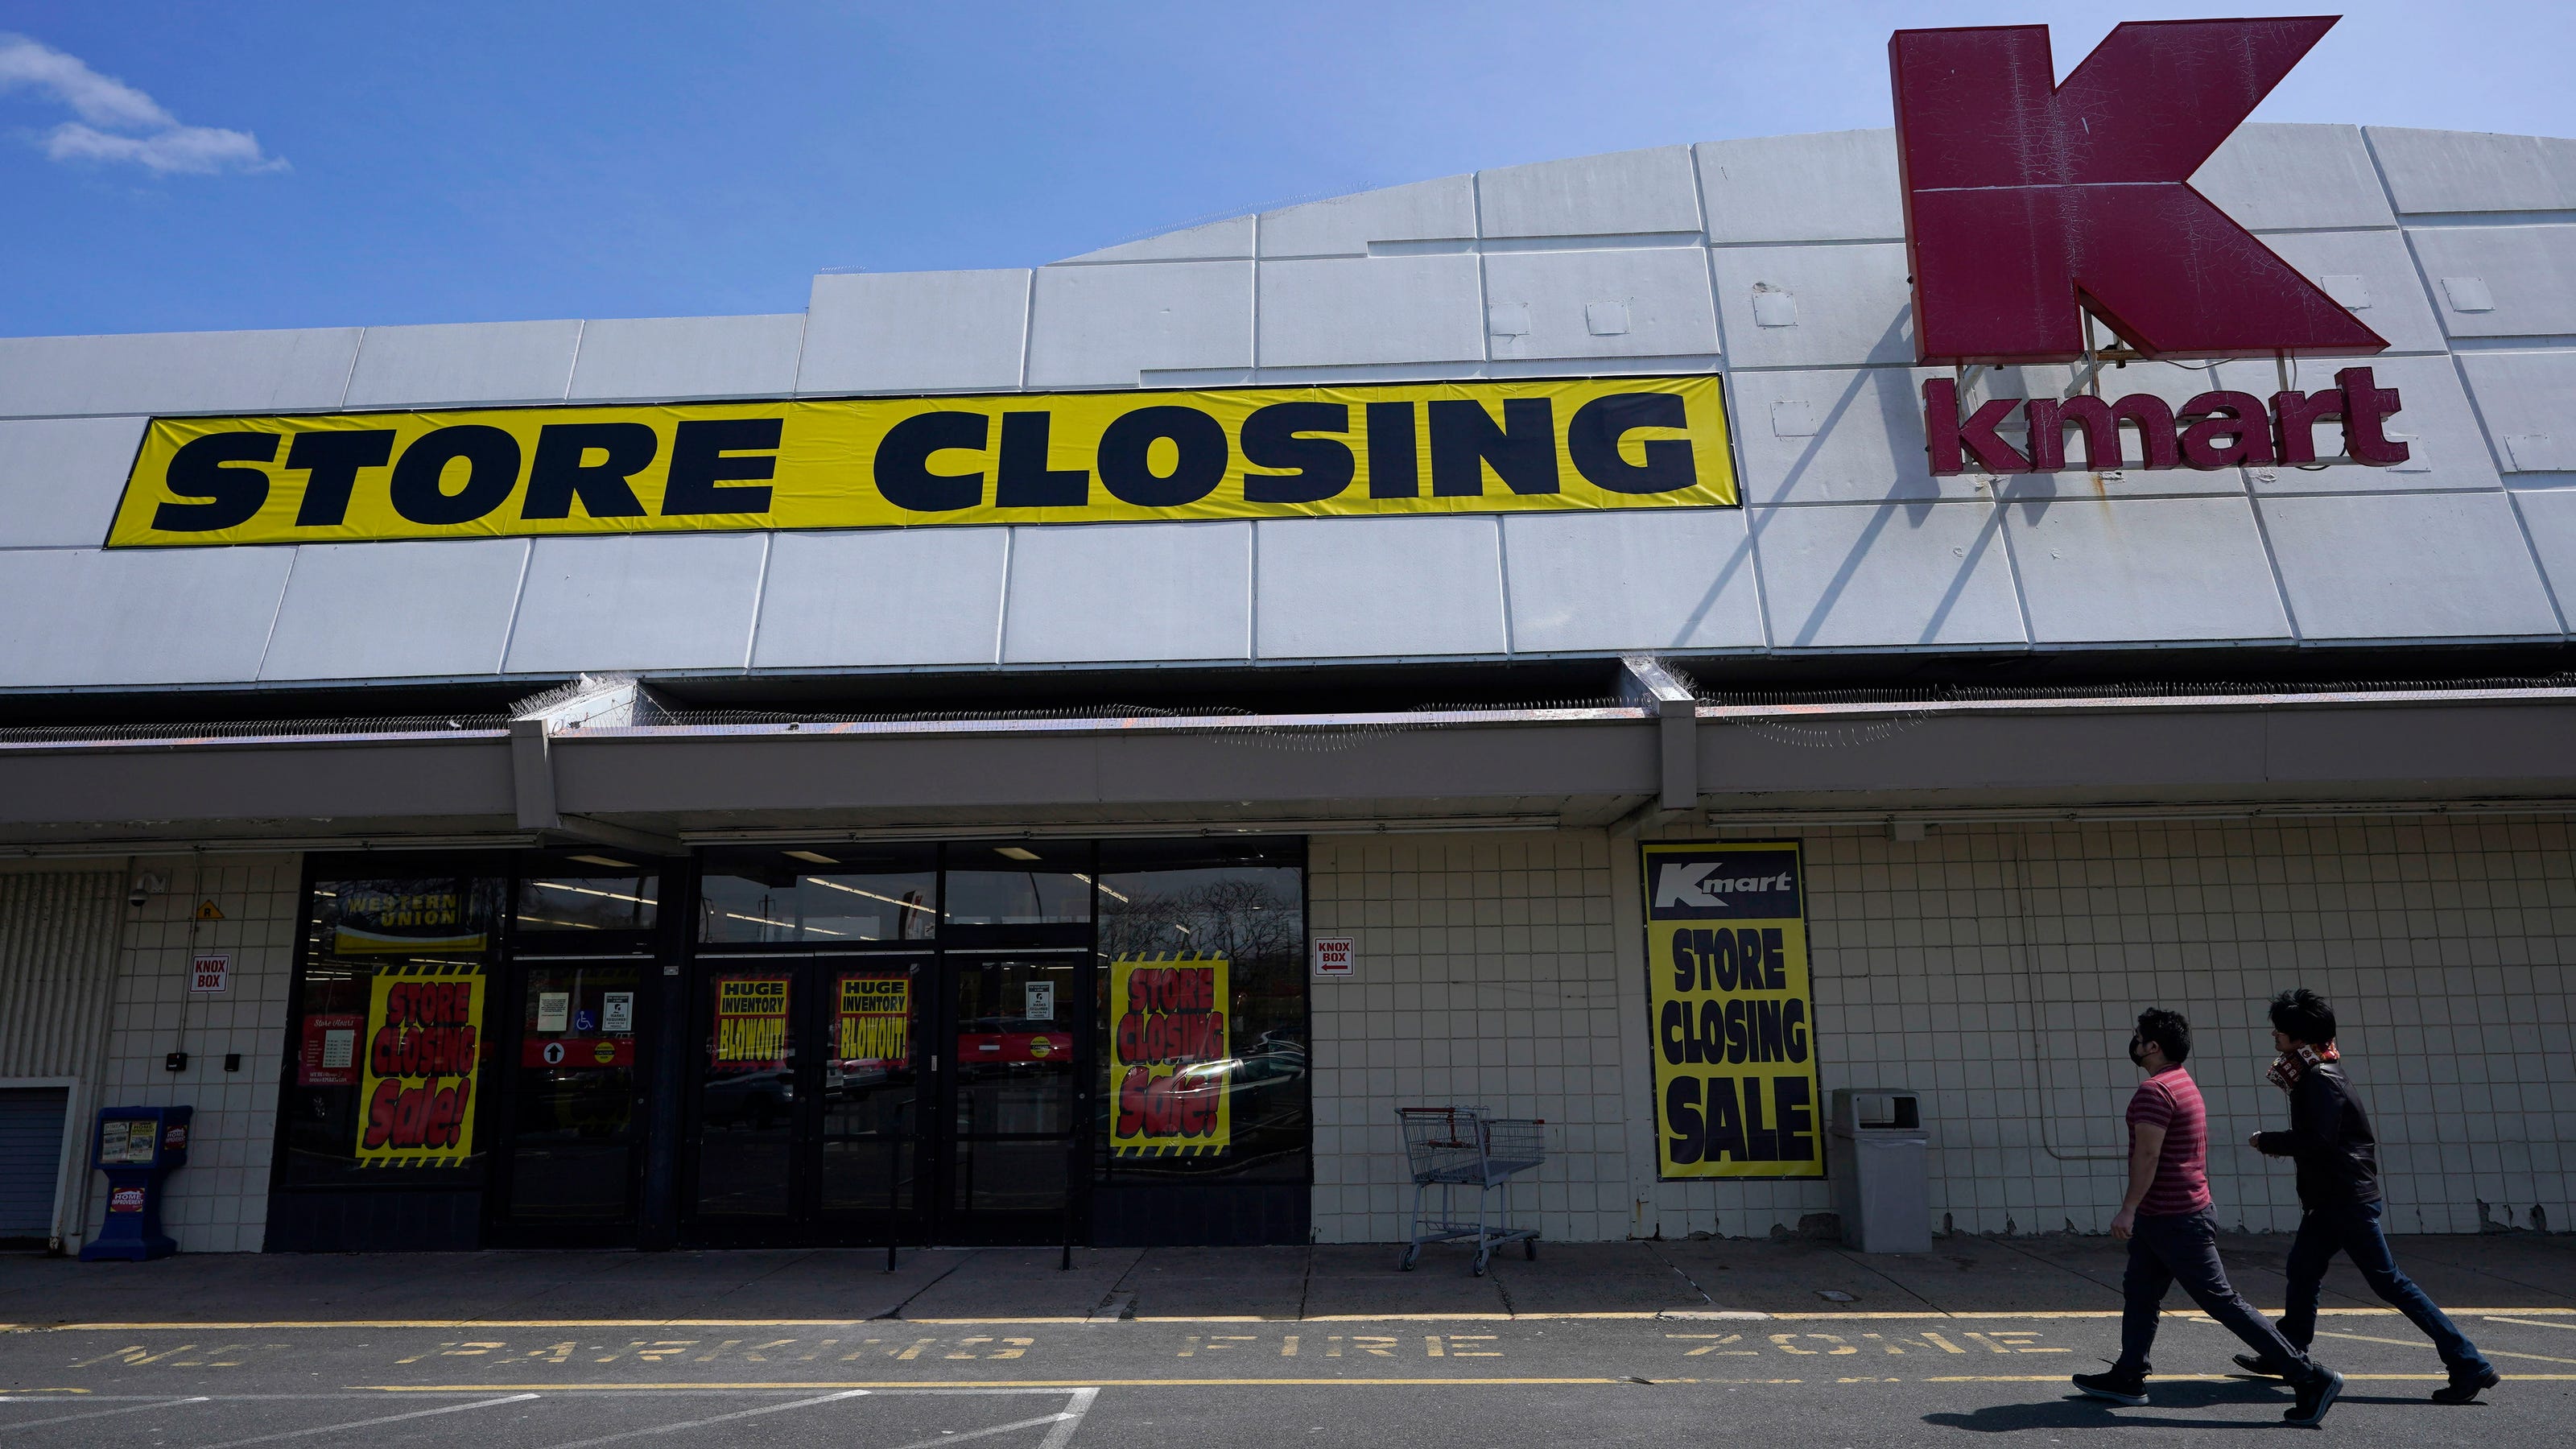 Last Kmart stores Three Kmarts remain after new round of closings